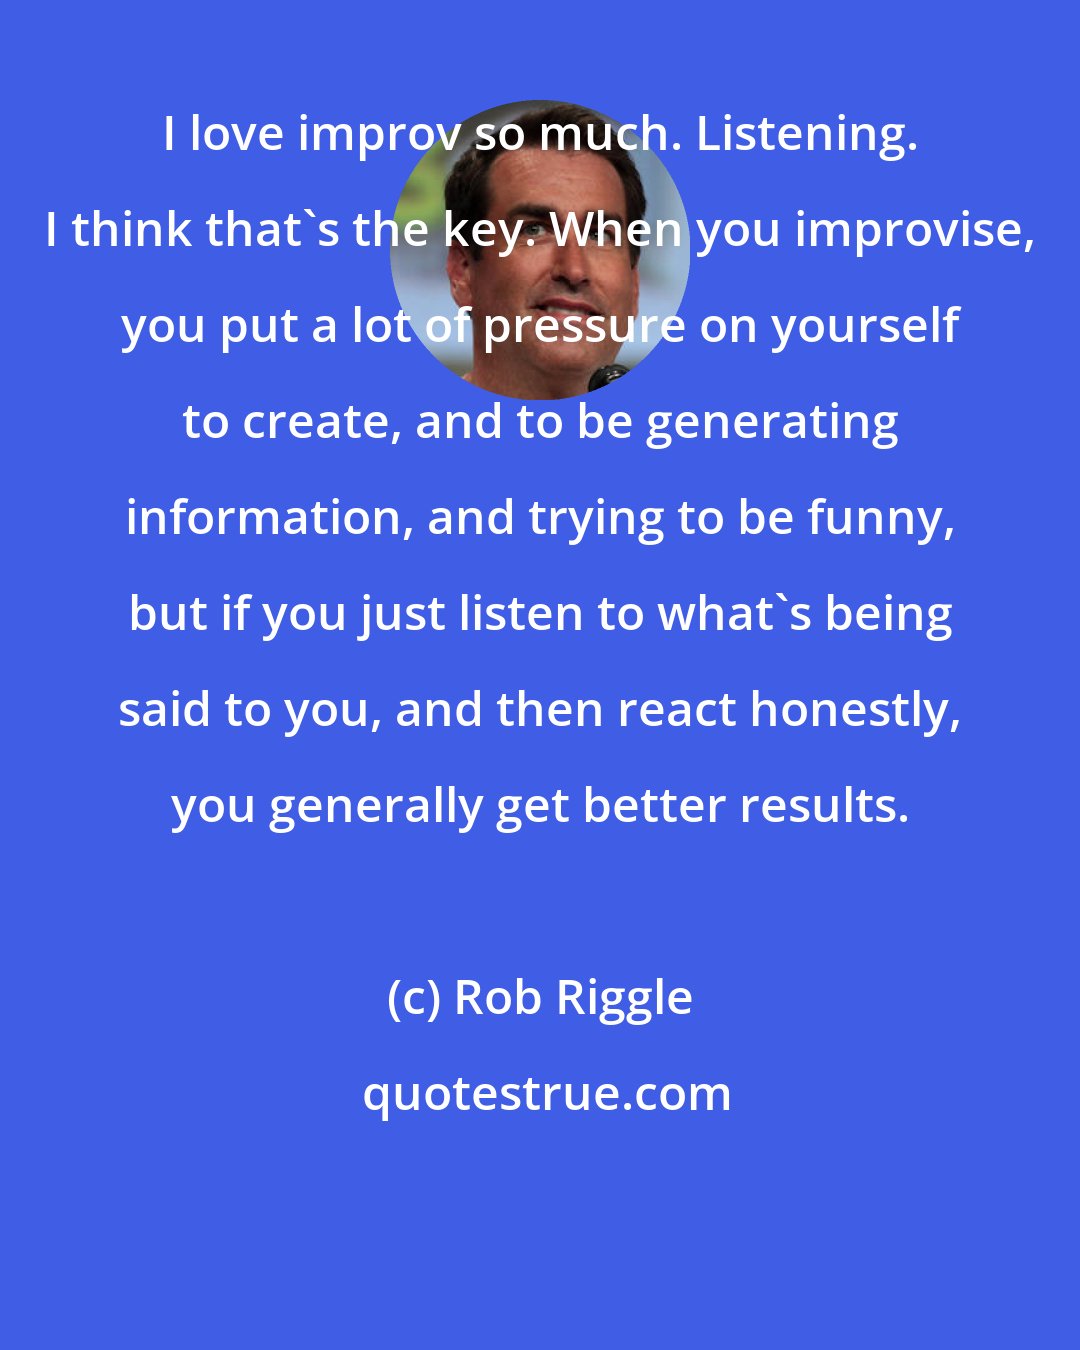 Rob Riggle: I love improv so much. Listening. I think that's the key. When you improvise, you put a lot of pressure on yourself to create, and to be generating information, and trying to be funny, but if you just listen to what's being said to you, and then react honestly, you generally get better results.